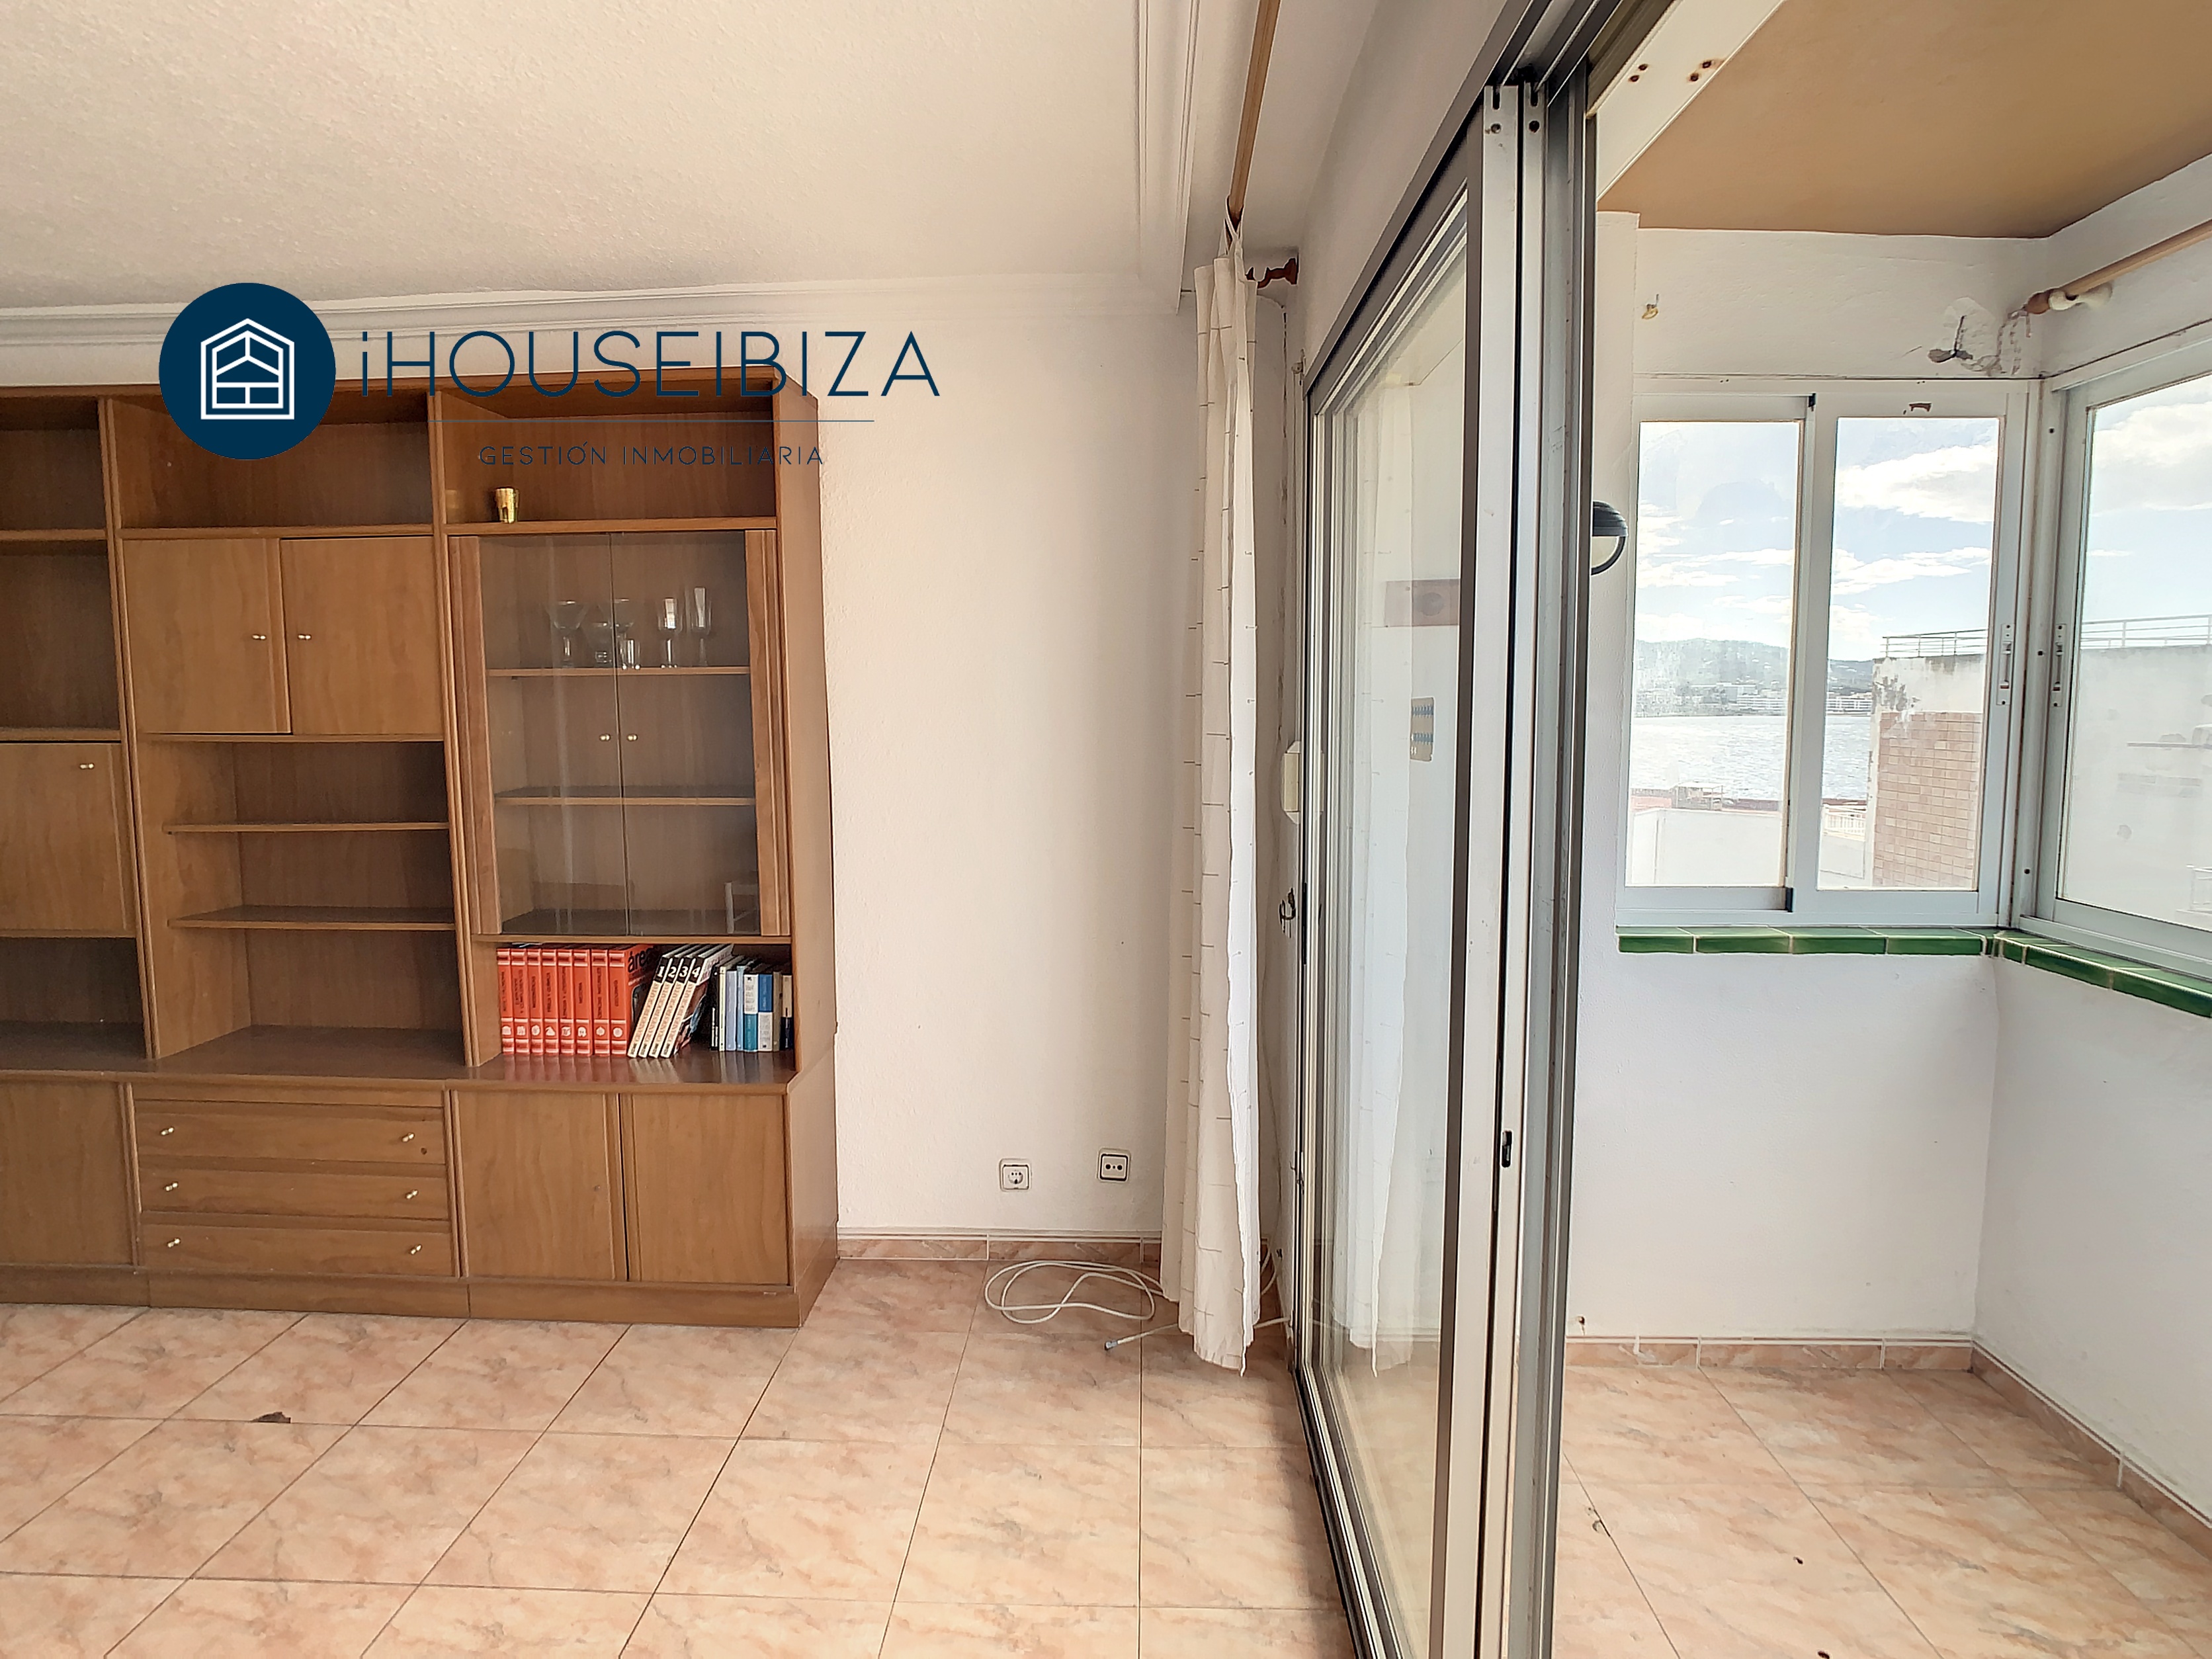 For sale APARTMENT of 69m2 with SEA VIEW